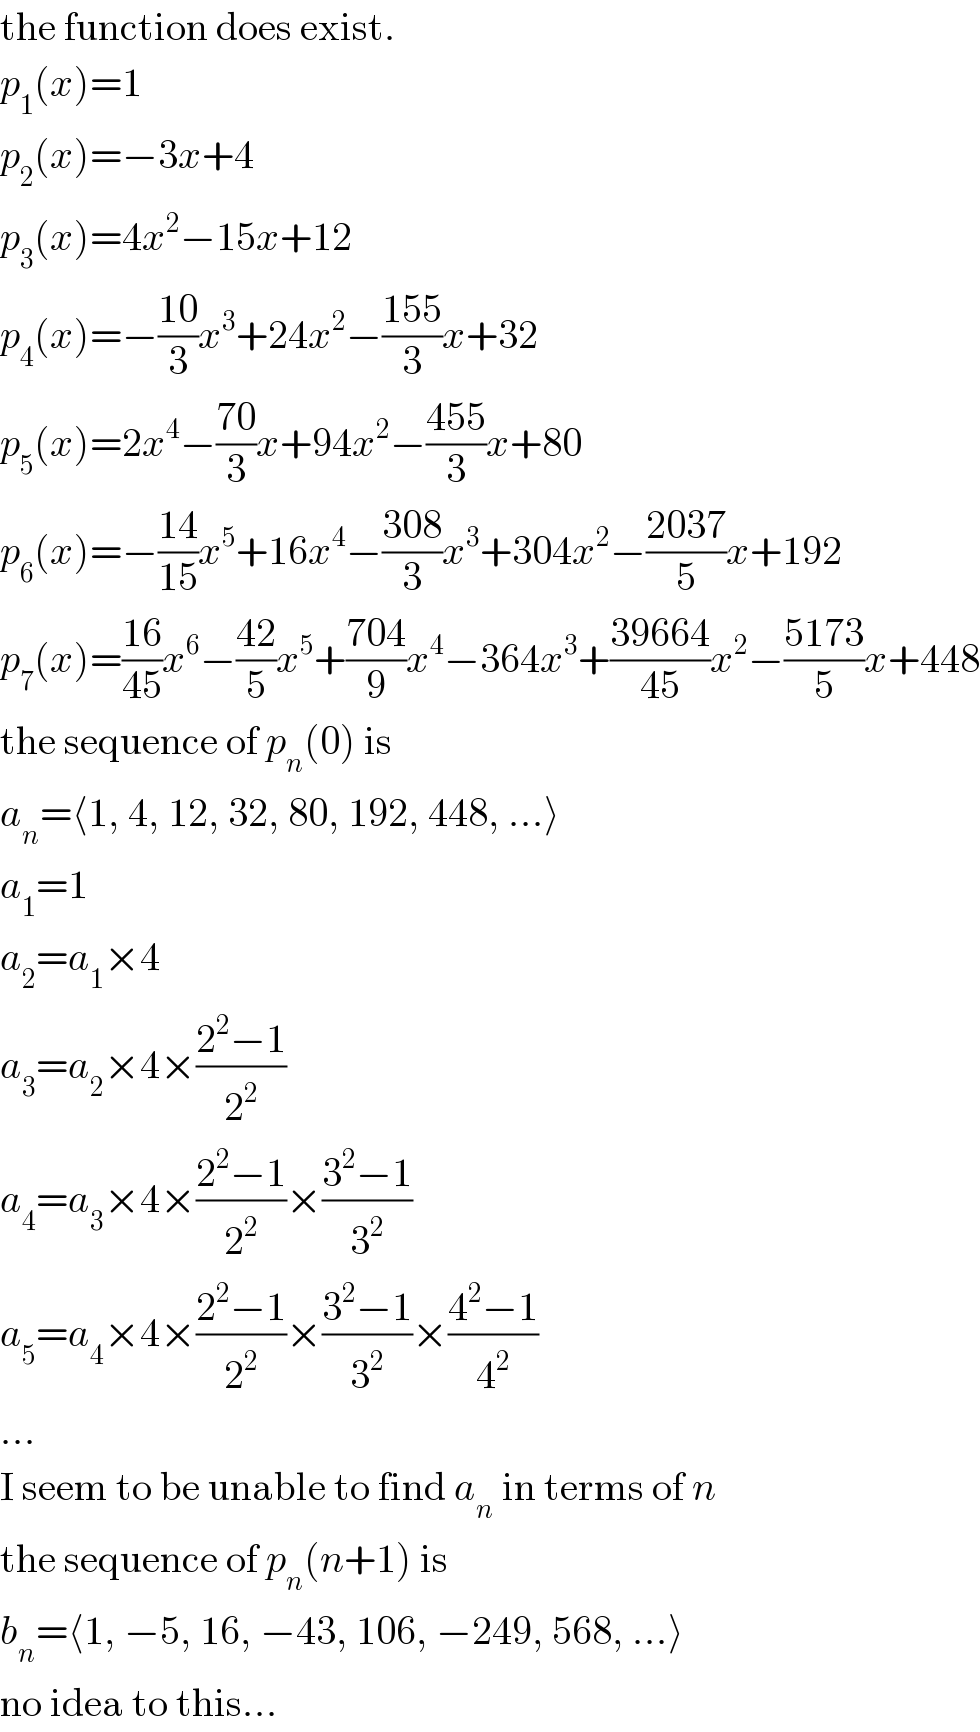 the function does exist.  p_1 (x)=1  p_2 (x)=−3x+4  p_3 (x)=4x^2 −15x+12  p_4 (x)=−((10)/3)x^3 +24x^2 −((155)/3)x+32  p_5 (x)=2x^4 −((70)/3)x+94x^2 −((455)/3)x+80  p_6 (x)=−((14)/(15))x^5 +16x^4 −((308)/3)x^3 +304x^2 −((2037)/5)x+192  p_7 (x)=((16)/(45))x^6 −((42)/5)x^5 +((704)/9)x^4 −364x^3 +((39664)/(45))x^2 −((5173)/5)x+448  the sequence of p_n (0) is  a_n =⟨1, 4, 12, 32, 80, 192, 448, ...⟩  a_1 =1  a_2 =a_1 ×4  a_3 =a_2 ×4×((2^2 −1)/2^2 )  a_4 =a_3 ×4×((2^2 −1)/2^2 )×((3^2 −1)/3^2 )  a_5 =a_4 ×4×((2^2 −1)/2^2 )×((3^2 −1)/3^2 )×((4^2 −1)/4^2 )  ...  I seem to be unable to find a_n  in terms of n  the sequence of p_n (n+1) is  b_n =⟨1, −5, 16, −43, 106, −249, 568, ...⟩  no idea to this...  